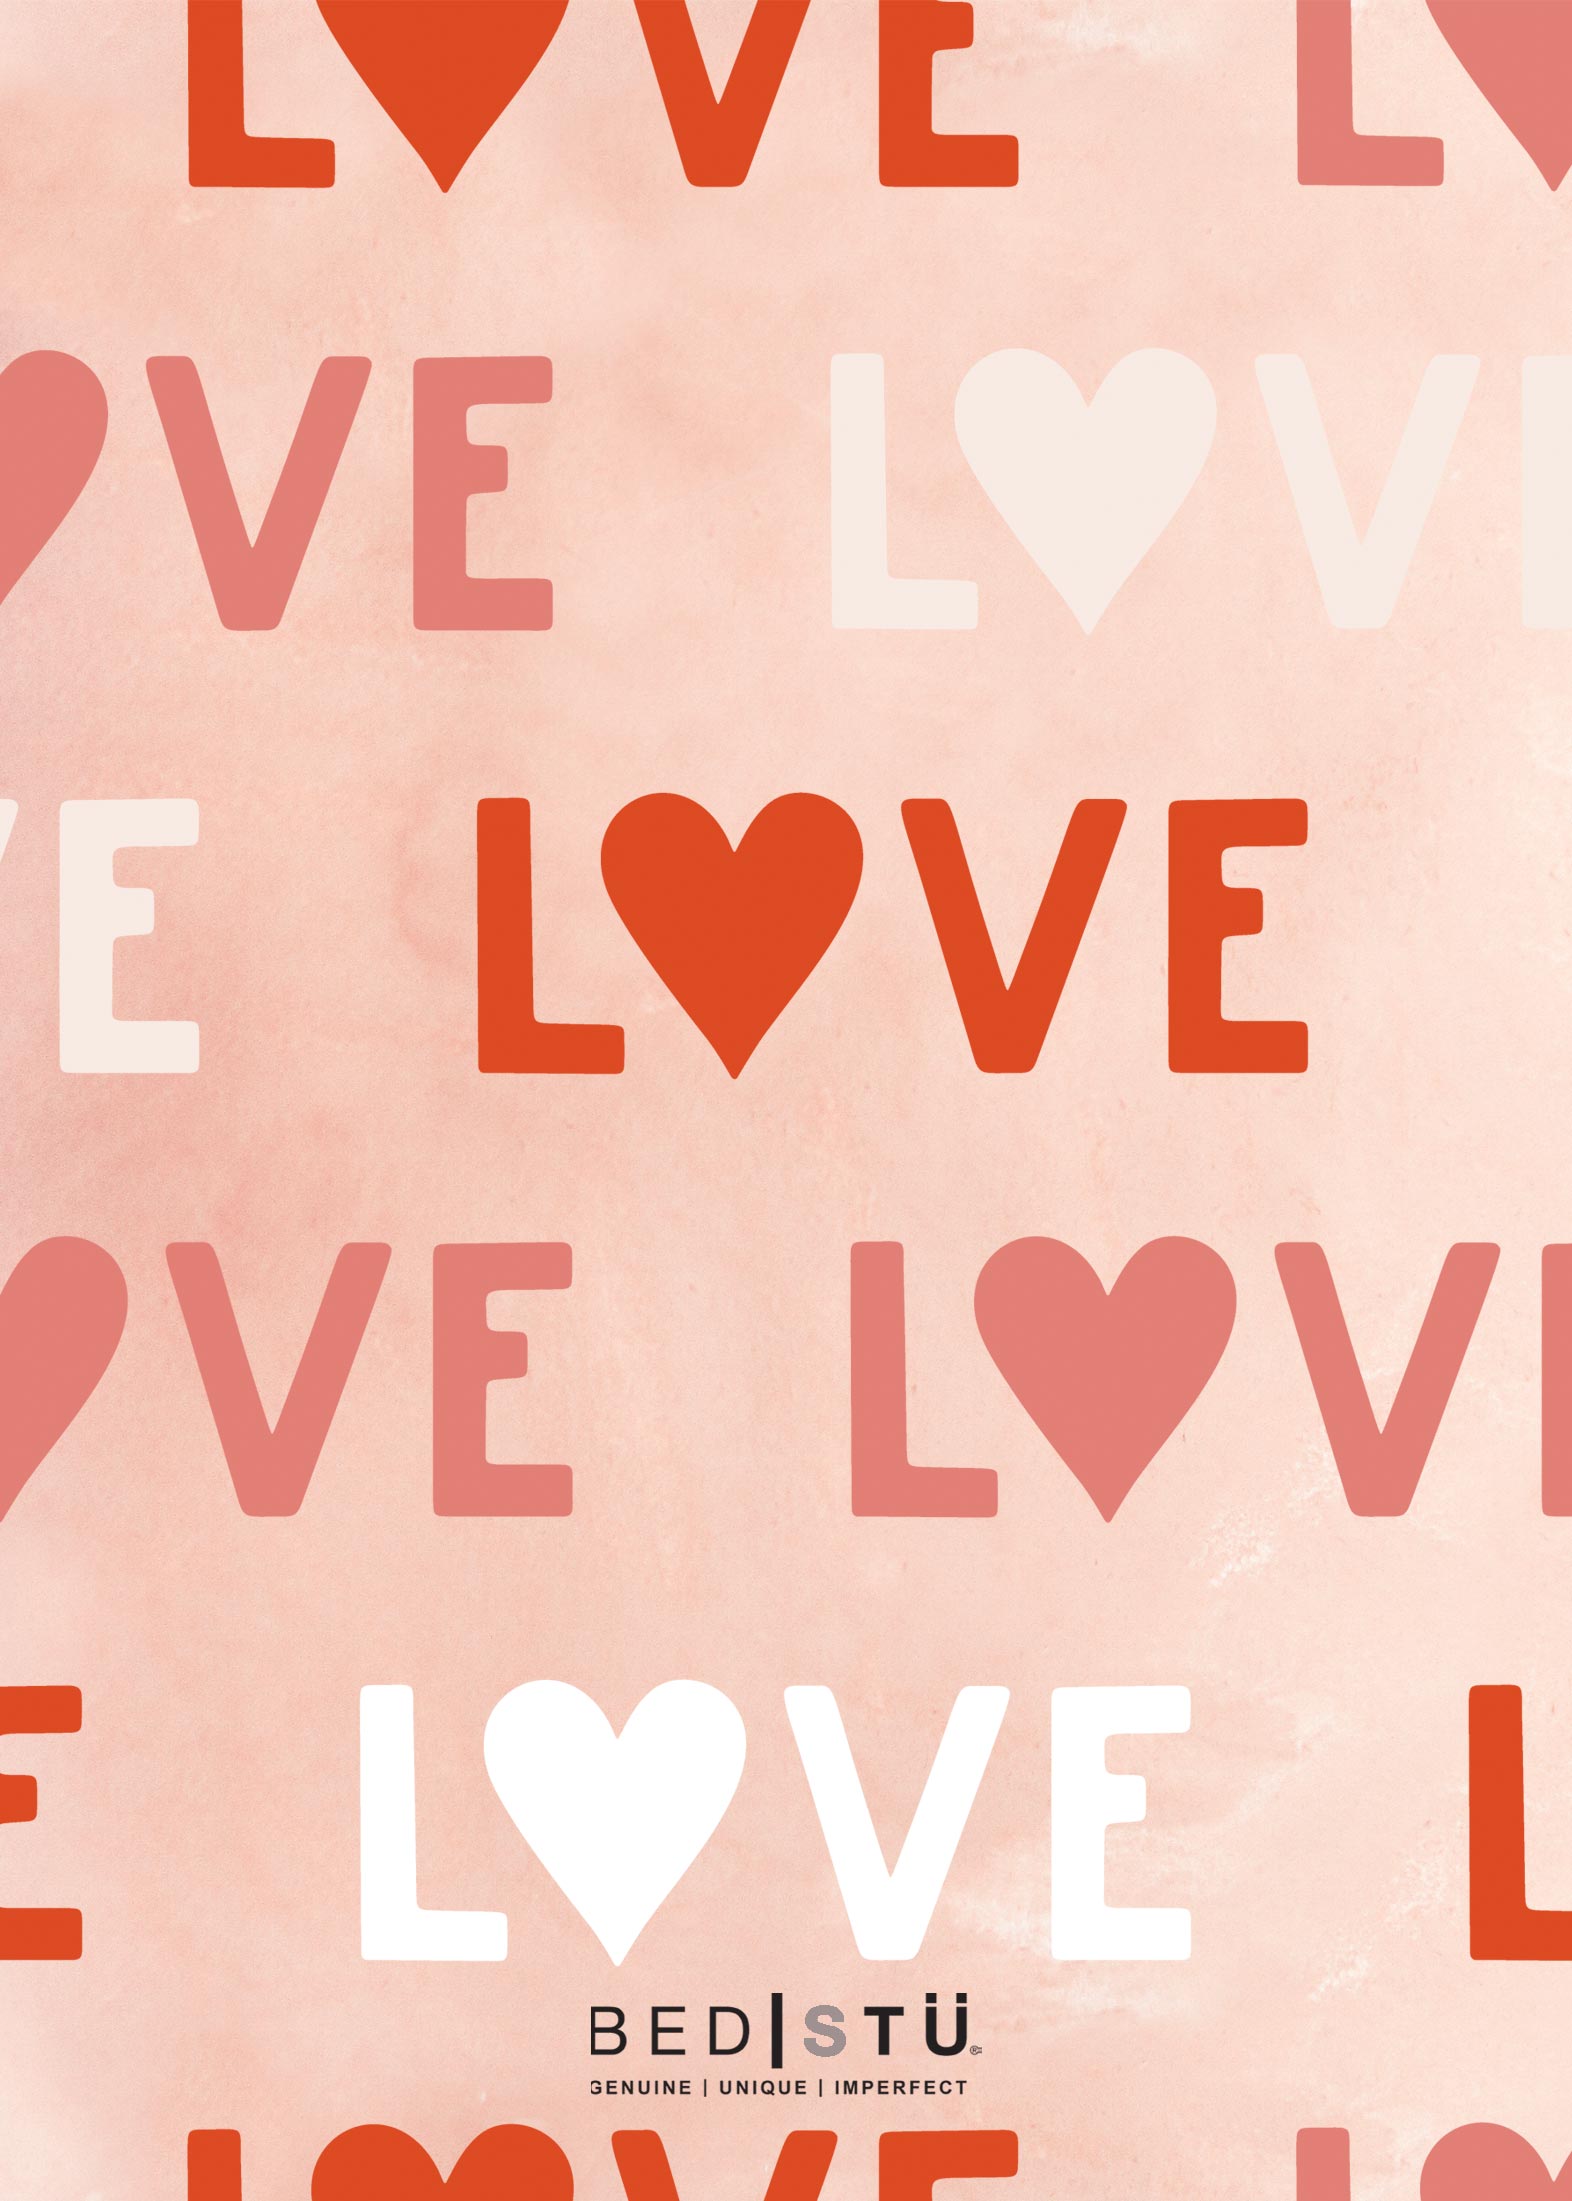 Find the perfect Love Love Love wallpaper online to surprise your special someone with a heartfelt gift from Bed|Stü.